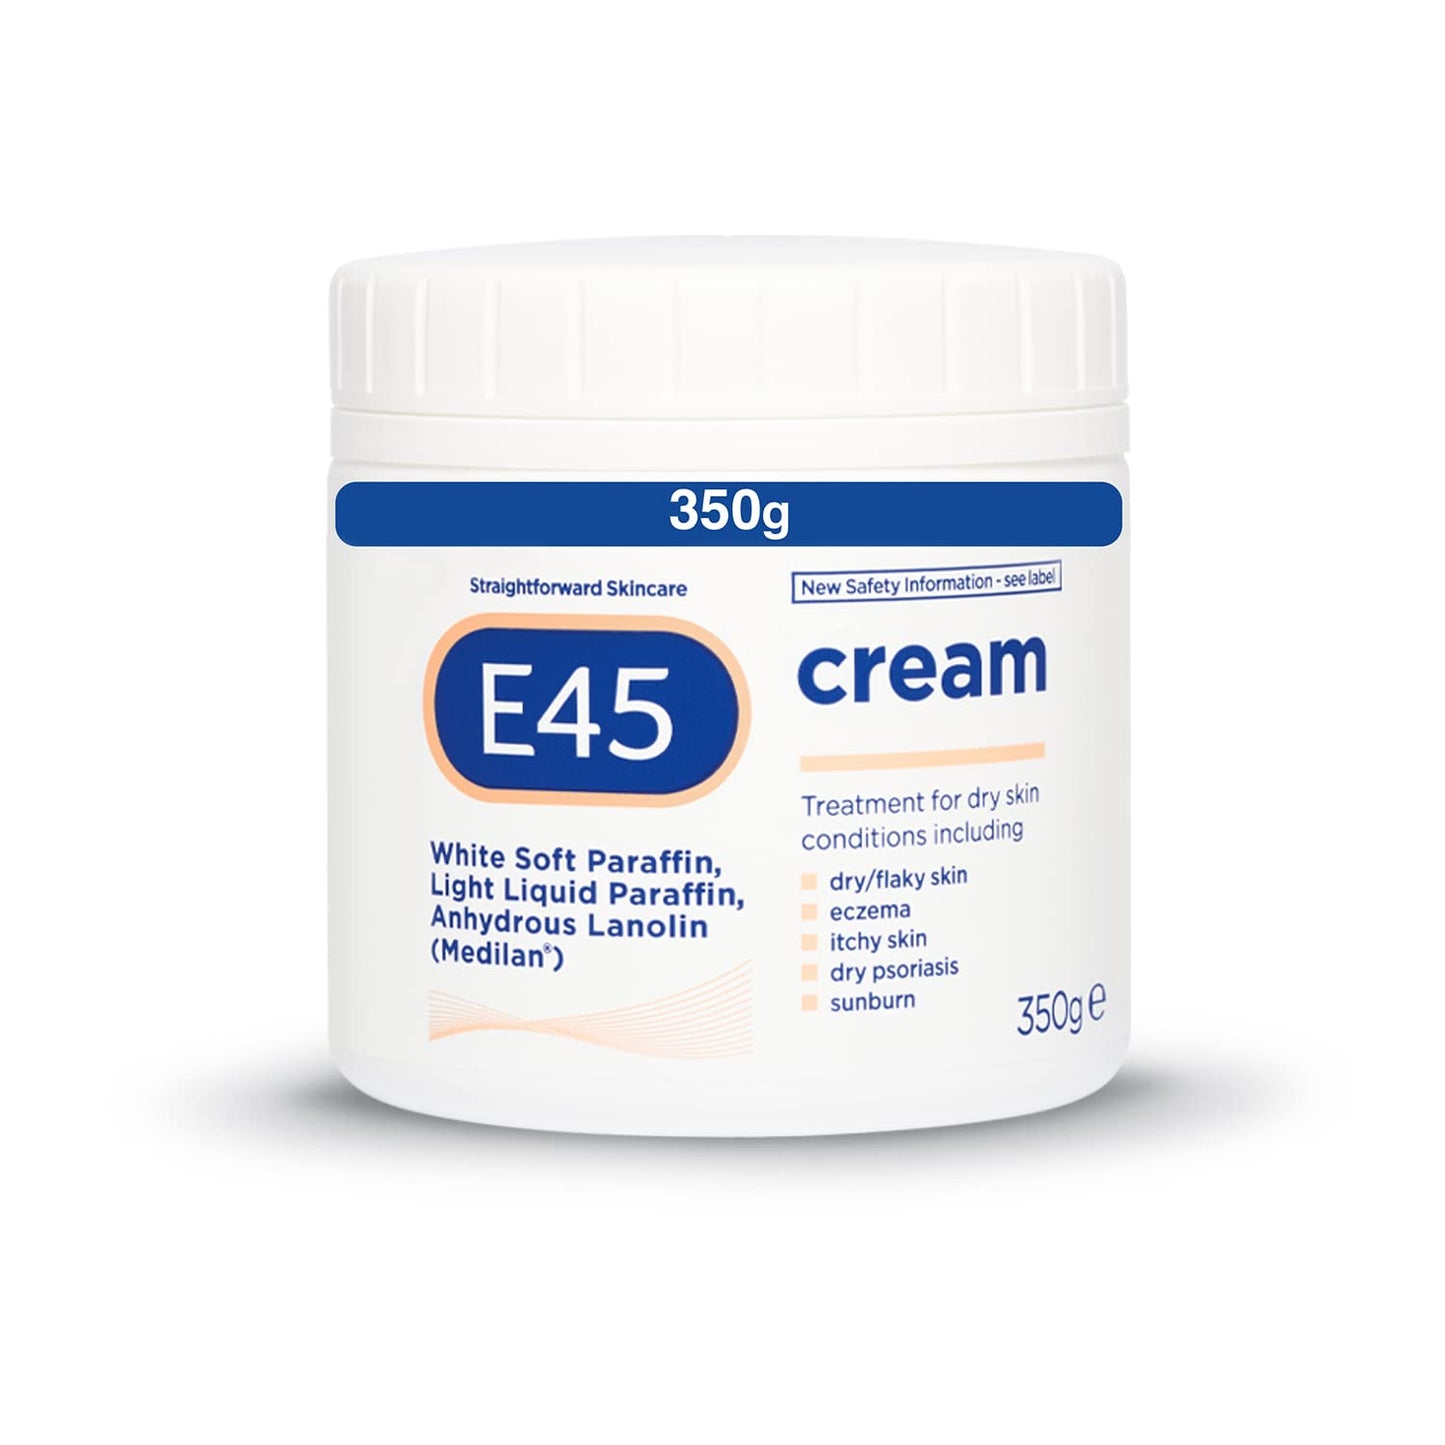 E45 Dermatological Cream Treatment for Dry Skin Conditions (350g)